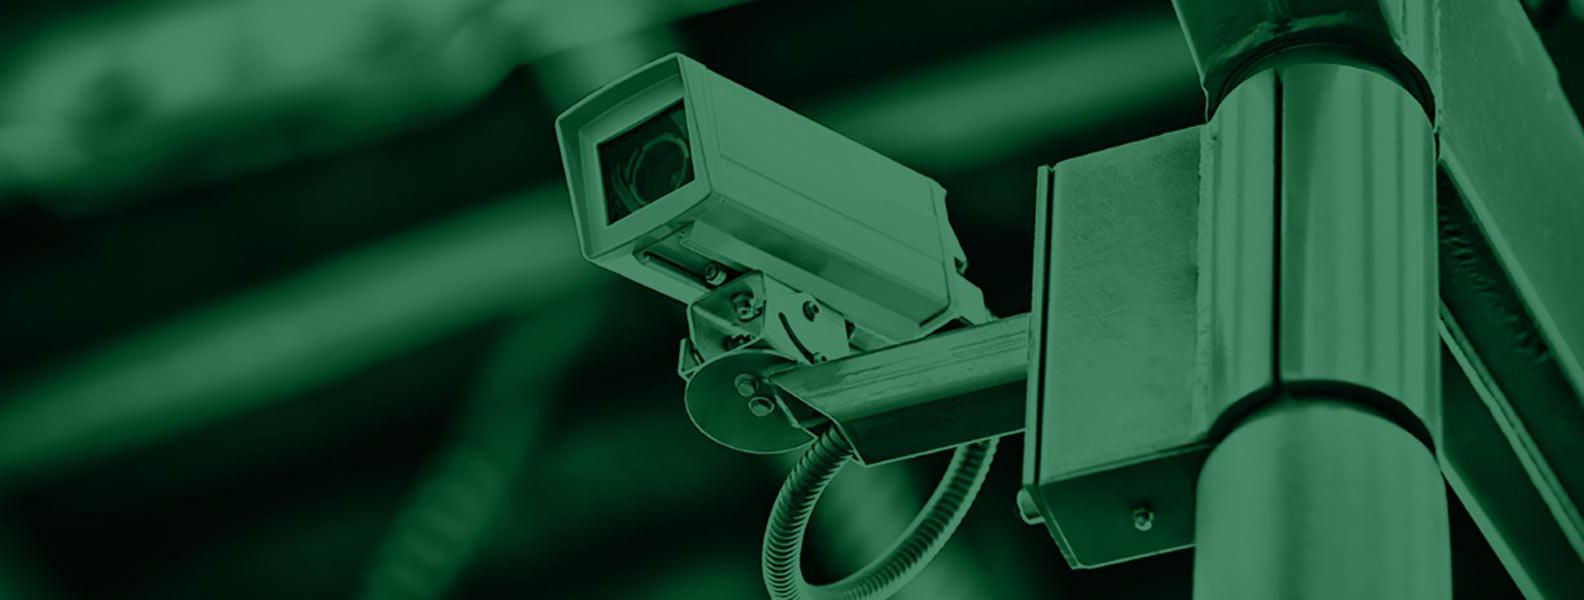 Technical surveillance encompasses the use of electronic devices and advanced technologies to monitor activities, gather information, and protect assets. Today,